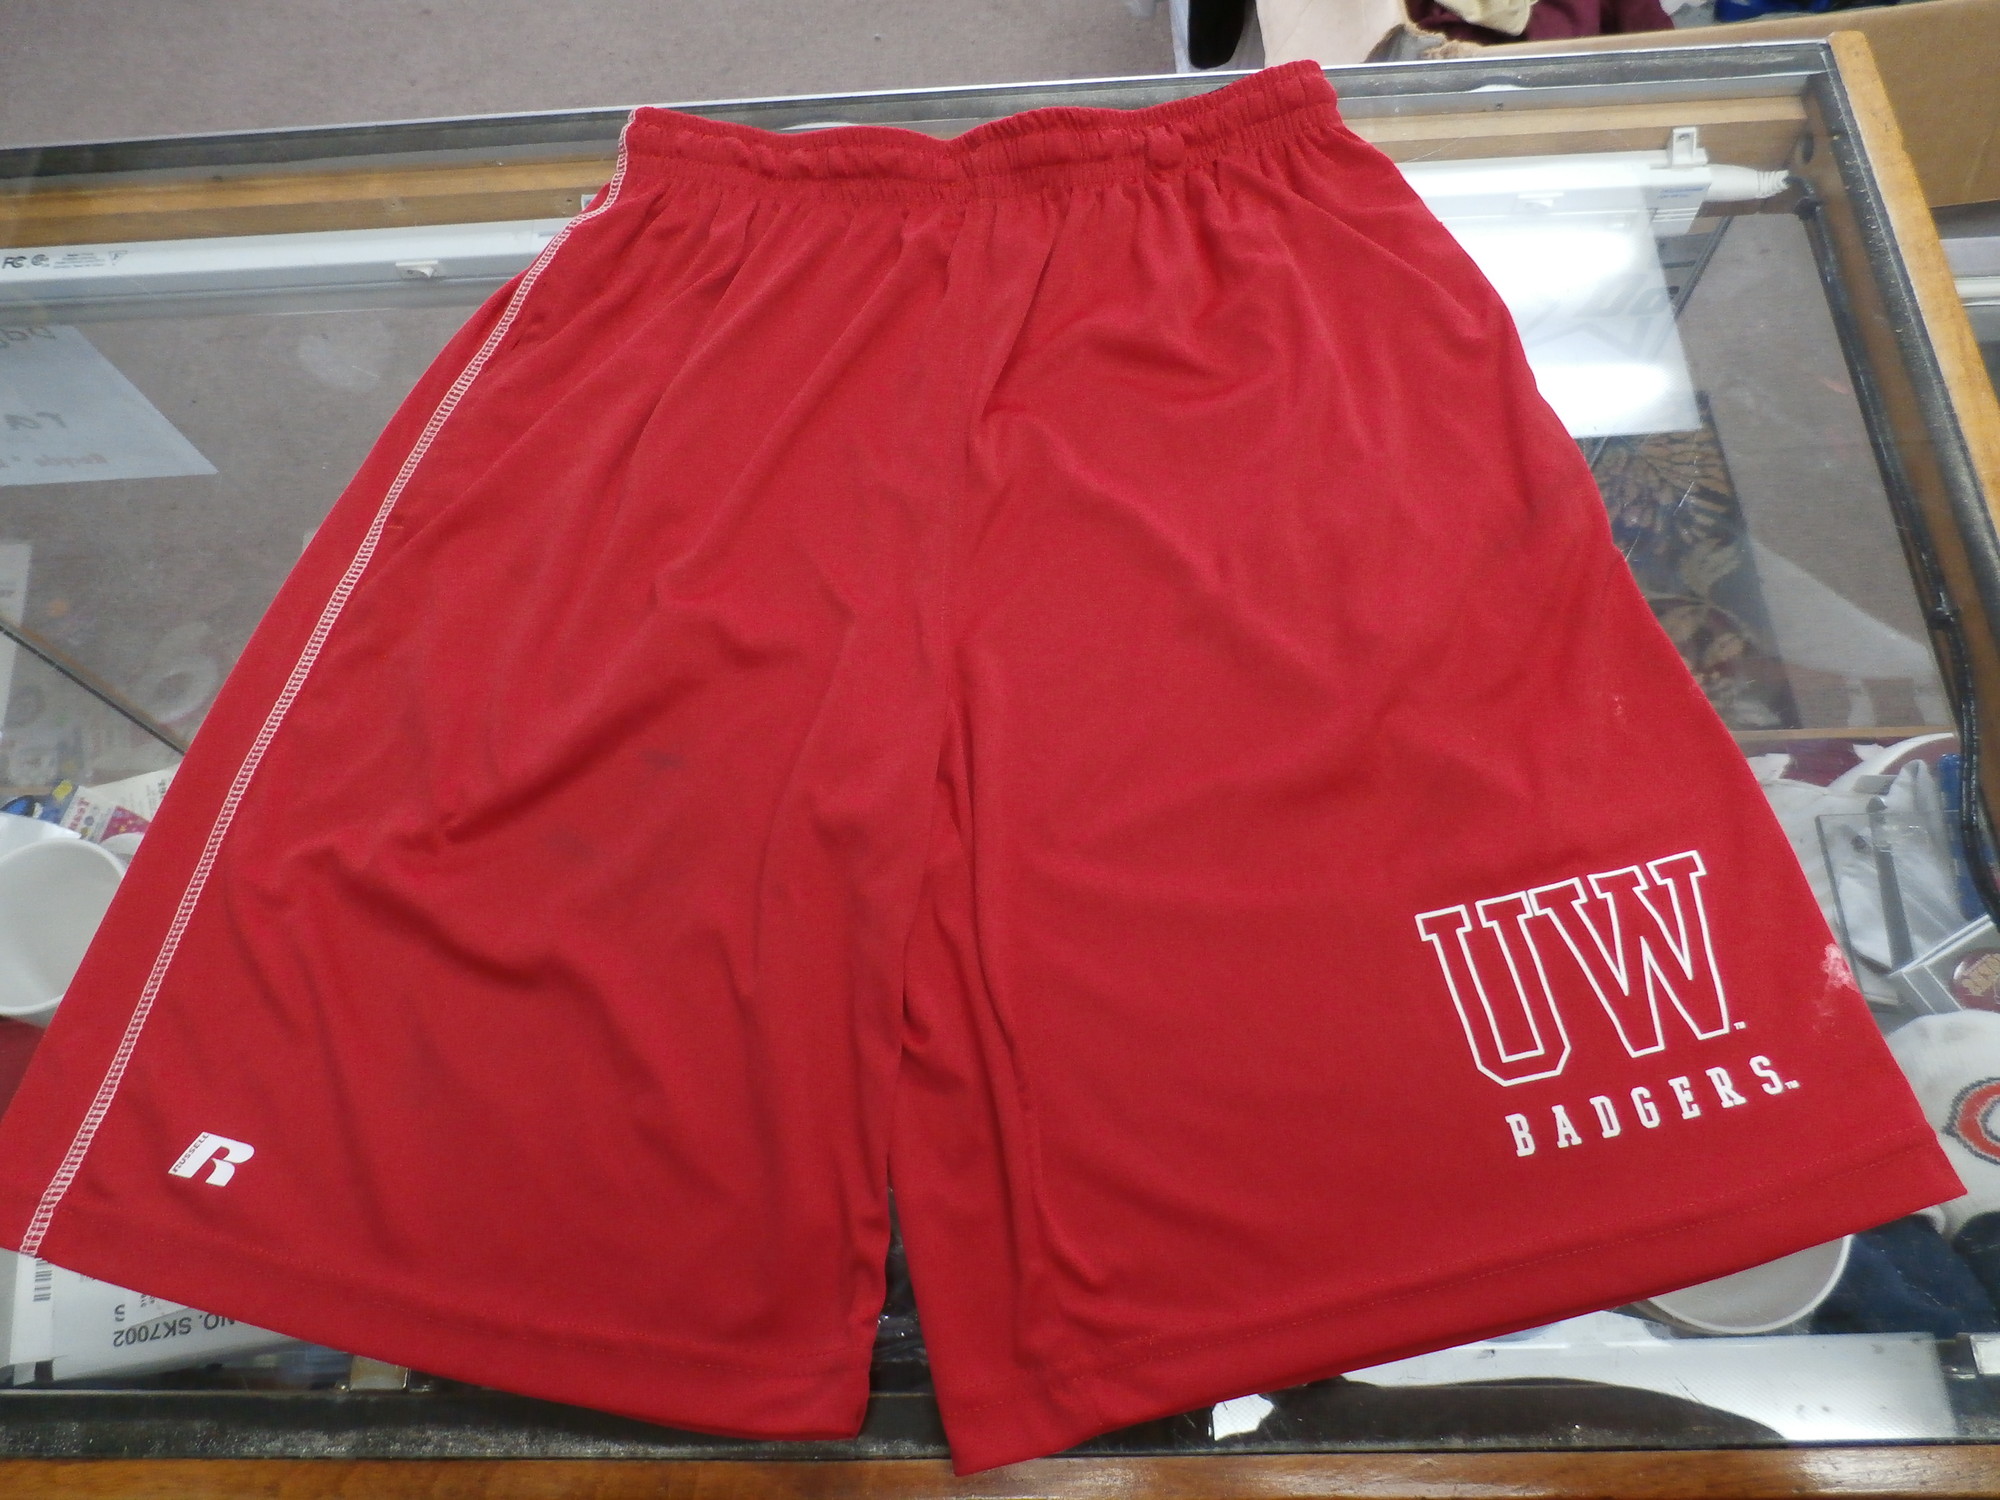 Russell Men's Wisconsin Badgers shorts red size Small polyester #33419
Rating: (see below) 4- Fair Condition
Team: Wisconsin Badgers
Player: Team
Brand: Russell
Size: Men's    Small-  (Measured Flat: Waist 13\"; Length 21\"; Inseam 9\")
Measured flat: hip to hip; hip to hem; and groin to hem
Color: Red
Style: elastic waistband; screen pressed; shorts
Material: 100% polyester
Condition: 4- Fair Condition: wrinkled; minor pilling and fuzz; some stretching from use; there is both white and dark staining in multiple spots on shorts;
Item #: 33419
Shipping: FREE